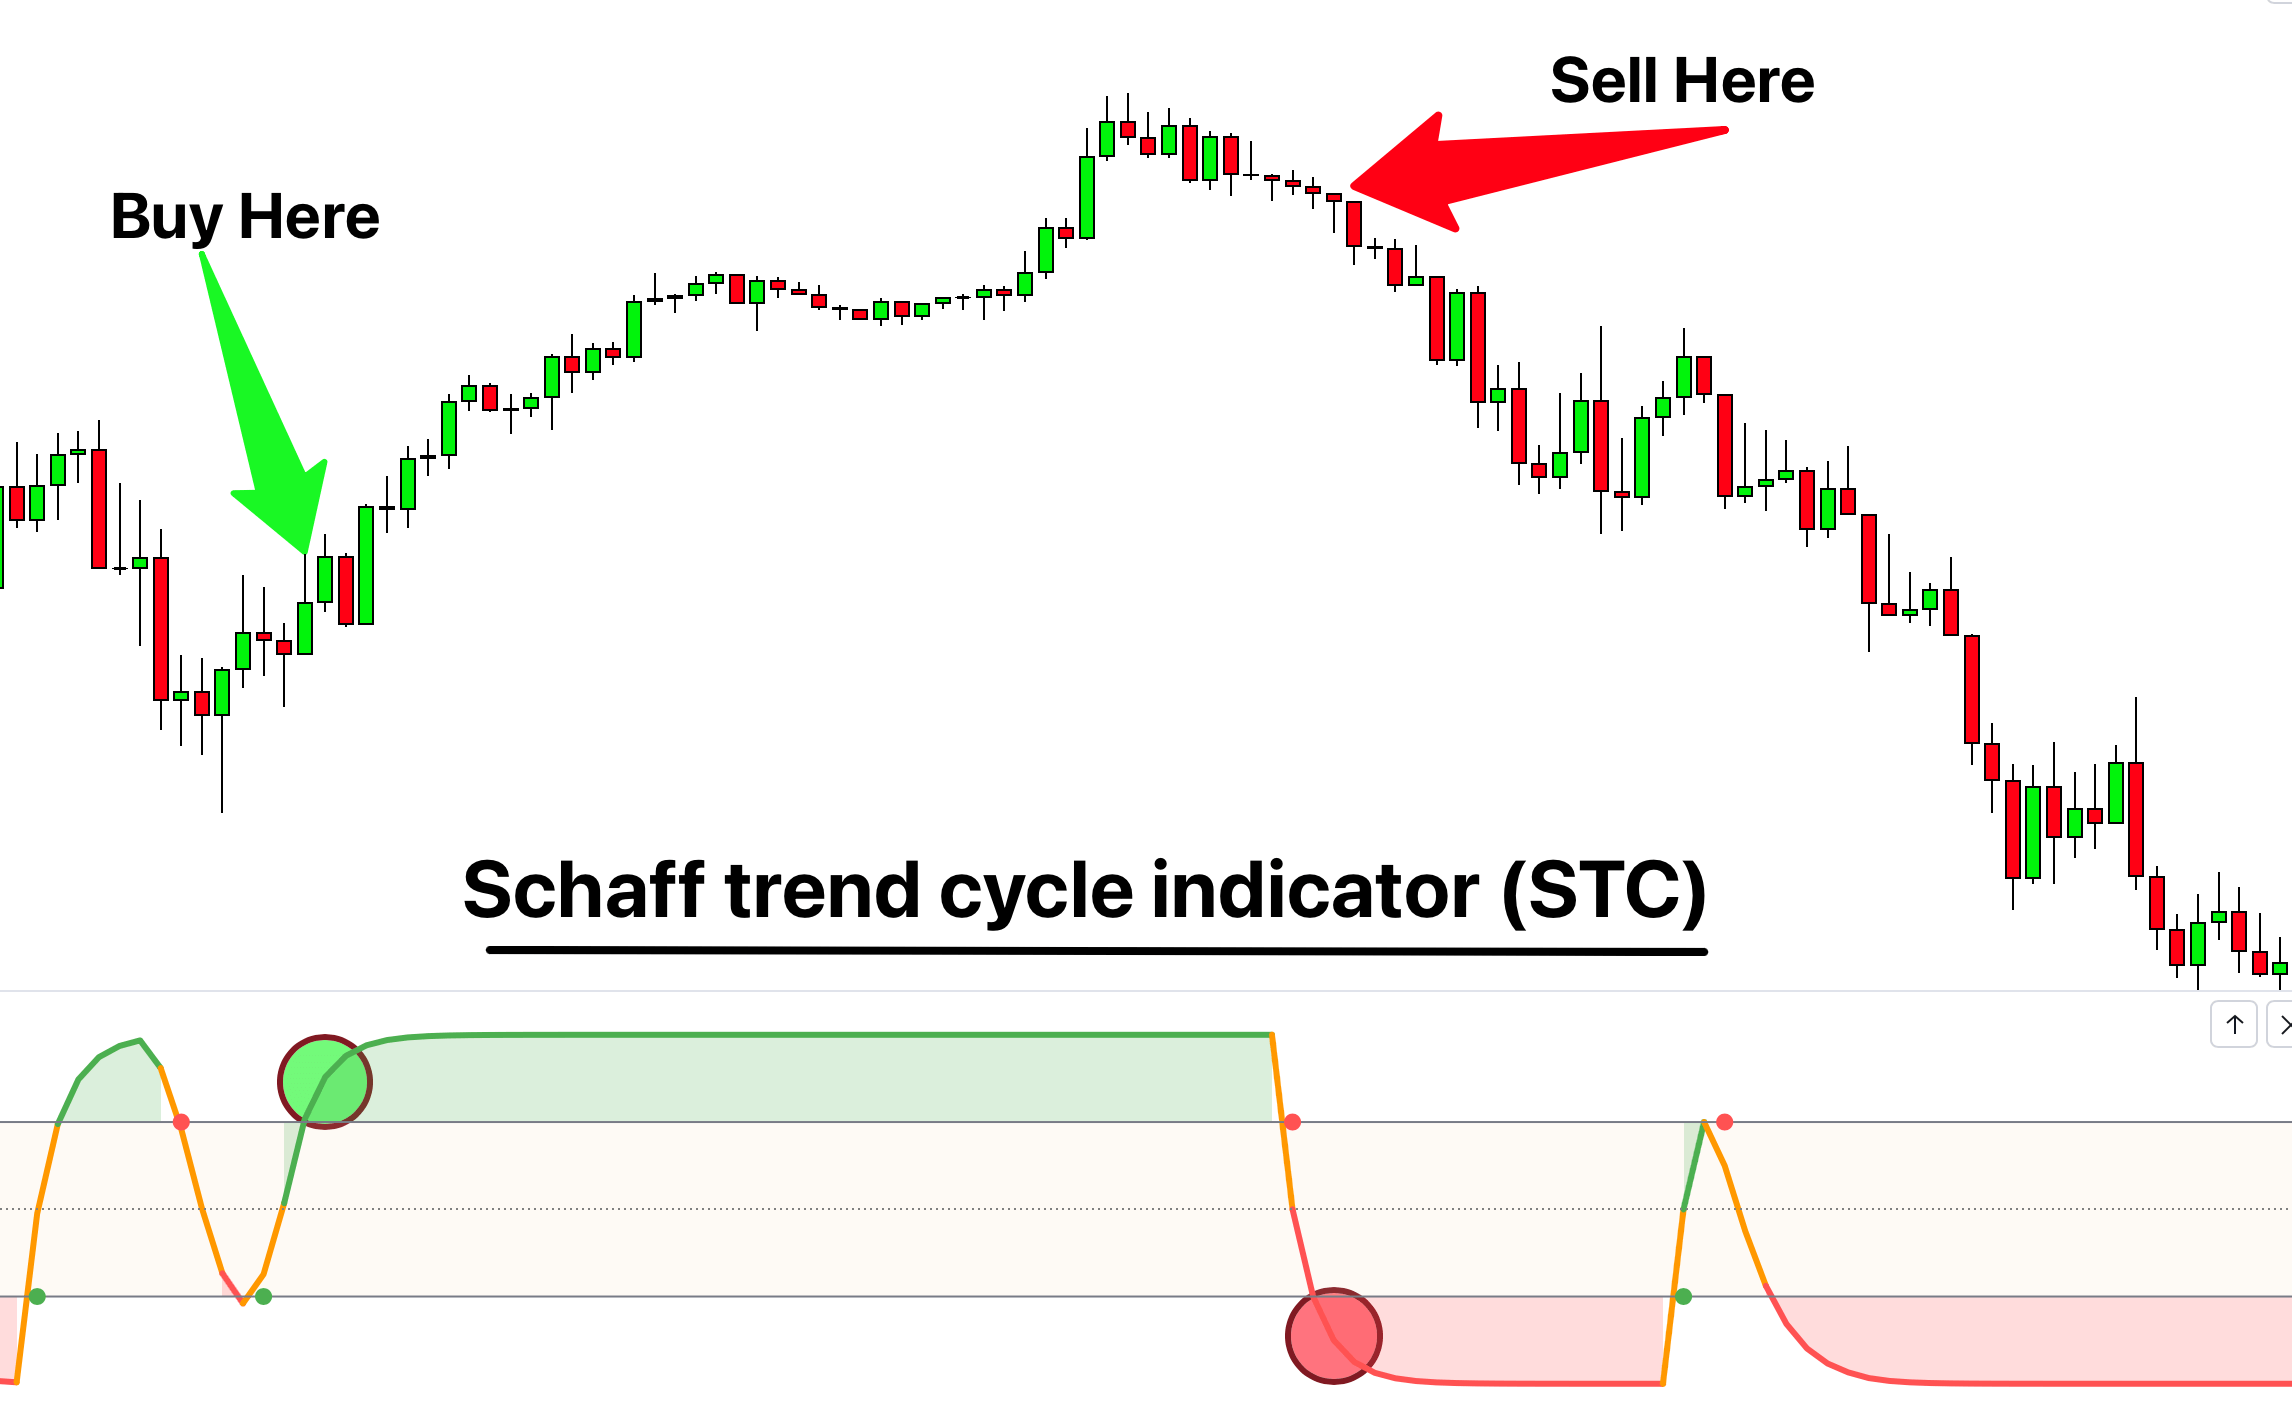 Schaff trend cycle indicator